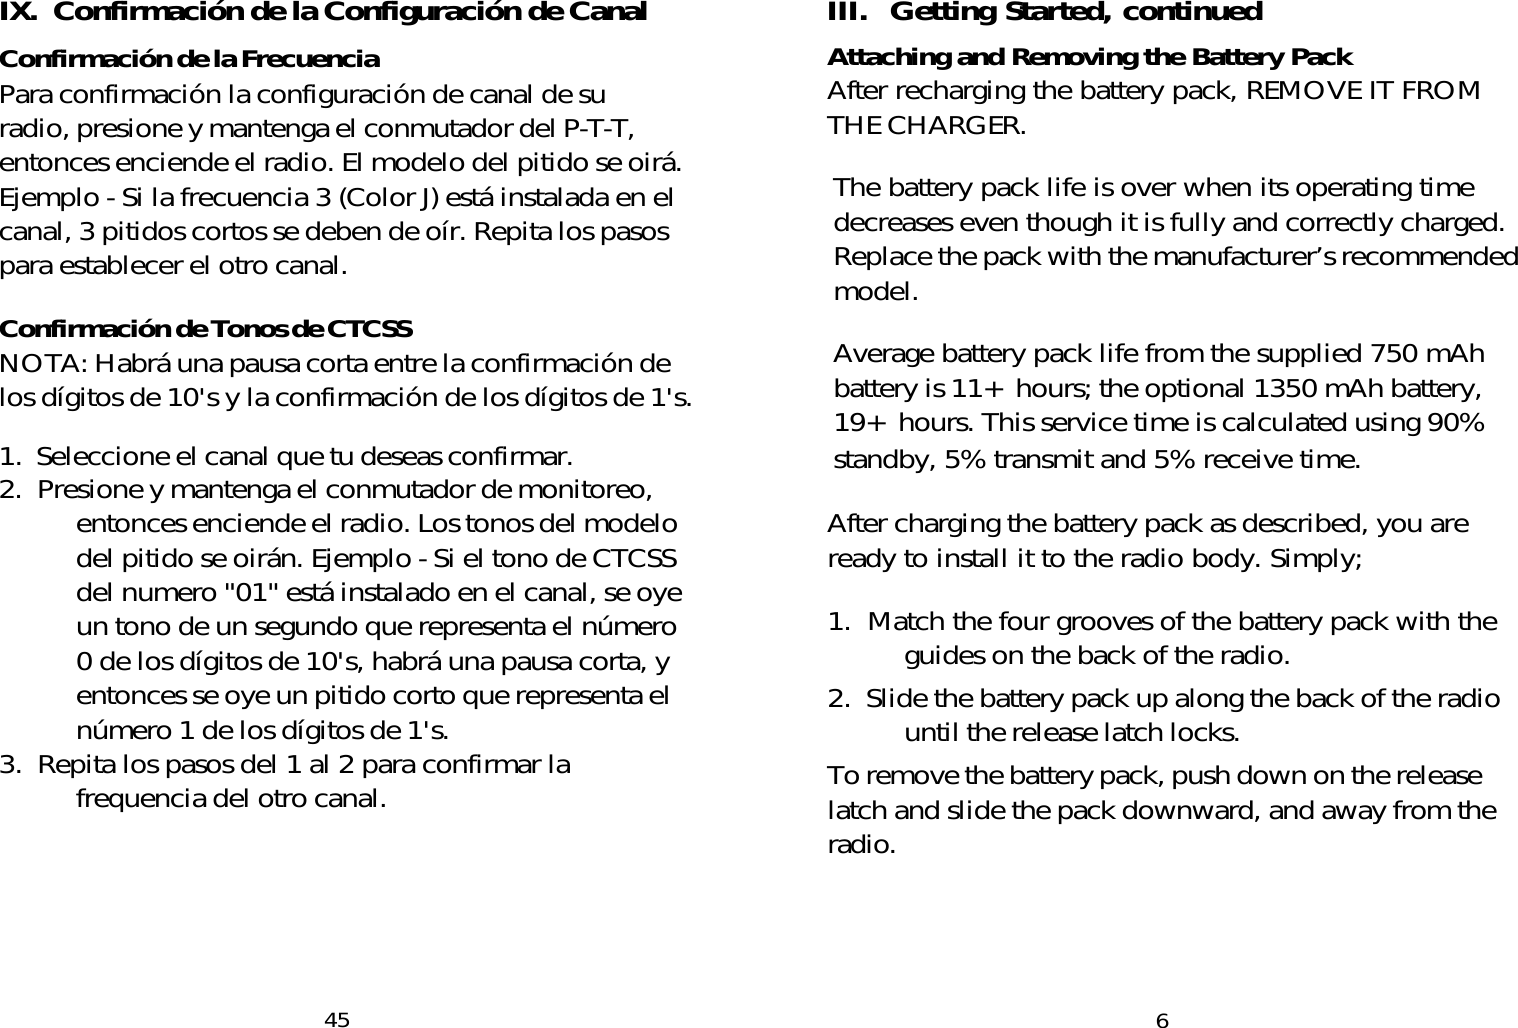 III.  Getting Started, continuedAttaching and Removing the Battery PackAfter recharging the battery pack, REMOVE IT FROMTHE CHARGER.The battery pack life is over when its operating timedecreases even though it is fully and correctly charged.Replace the pack with the manufacturer’s recommendedmodel.Average battery pack life from the supplied 750 mAhbattery is 11+ hours; the optional 1350 mAh battery,19+ hours. This service time is calculated using 90%standby, 5% transmit and 5% receive time.After charging the battery pack as described, you areready to install it to the radio body. Simply;1.  Match the four grooves of the battery pack with theguides on the back of the radio.2.  Slide the battery pack up along the back of the radiountil the release latch locks.To remove the battery pack, push down on the releaselatch and slide the pack downward, and away from theradio.6IX.  Confirmación de la Configuración de CanalConfirmación de la FrecuenciaPara confirmación la configuración de canal de suradio, presione y mantenga el conmutador del P-T-T,entonces enciende el radio. El modelo del pitido se oirá.Ejemplo - Si la frecuencia 3 (Color J) está instalada en elcanal, 3 pitidos cortos se deben de oír. Repita los pasospara establecer el otro canal.Confirmación de Tonos de CTCSSNOTA: Habrá una pausa corta entre la confirmación delos dígitos de 10&apos;s y la confirmación de los dígitos de 1&apos;s.1.  Seleccione el canal que tu deseas confirmar.2. Presione y mantenga el conmutador de monitoreo,entonces enciende el radio. Los tonos del modelodel pitido se oirán. Ejemplo - Si el tono de CTCSSdel numero &quot;01&quot; está instalado en el canal, se oyeun tono de un segundo que representa el número0 de los dígitos de 10&apos;s, habrá una pausa corta, yentonces se oye un pitido corto que representa elnúmero 1 de los dígitos de 1&apos;s.3.  Repita los pasos del 1 al 2 para confirmar lafrequencia del otro canal.45